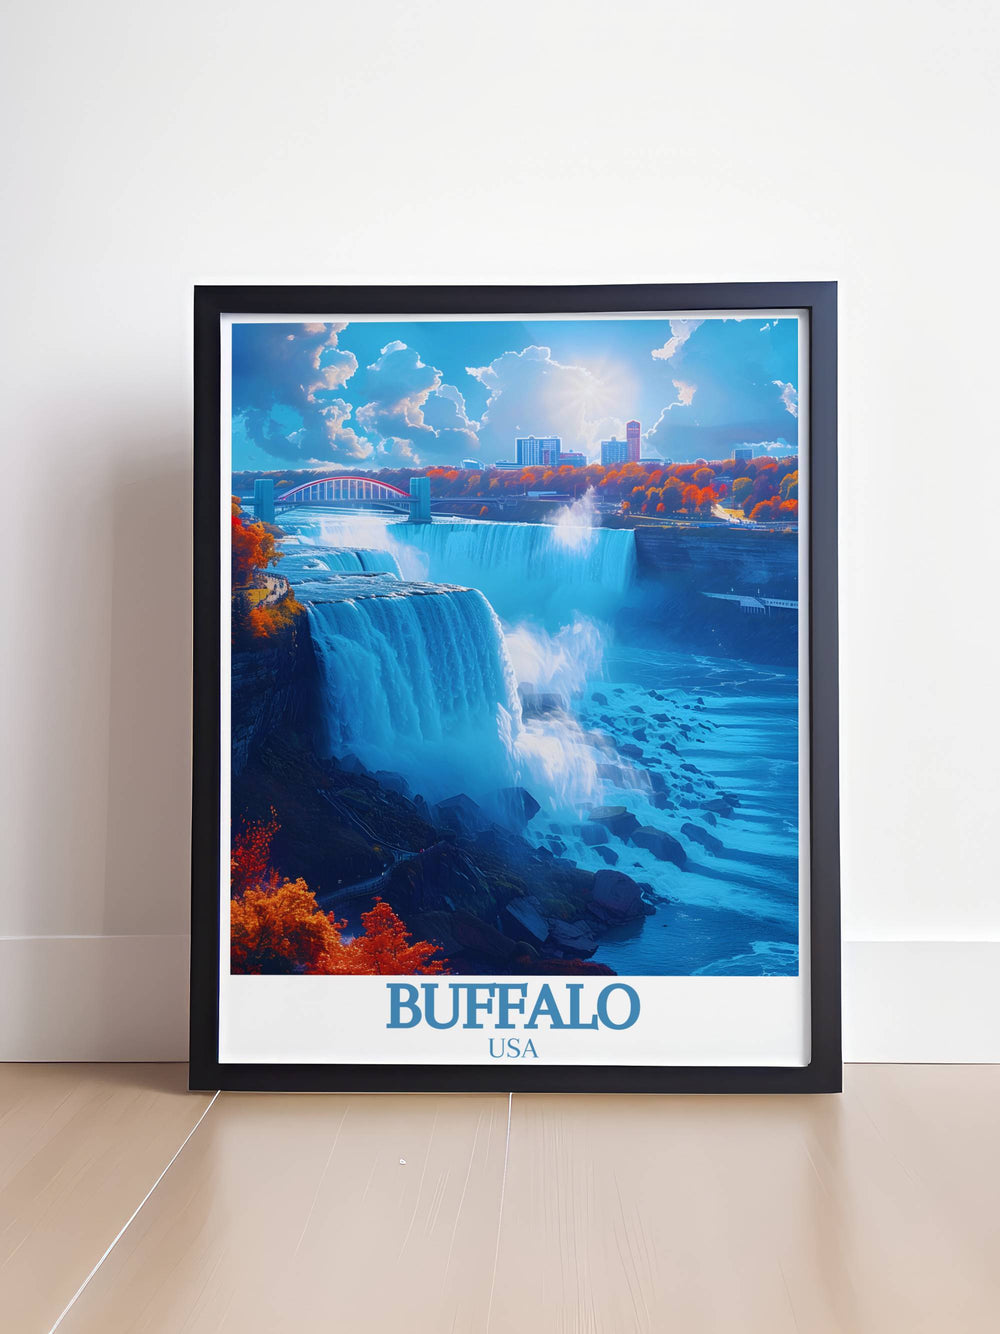 Vintage Buffalo city map poster with Niangara Falls capturing the historic beauty and timeless appeal of the city perfect for digital downloads and unique gifts for Buffalo enthusiasts and visitors alike